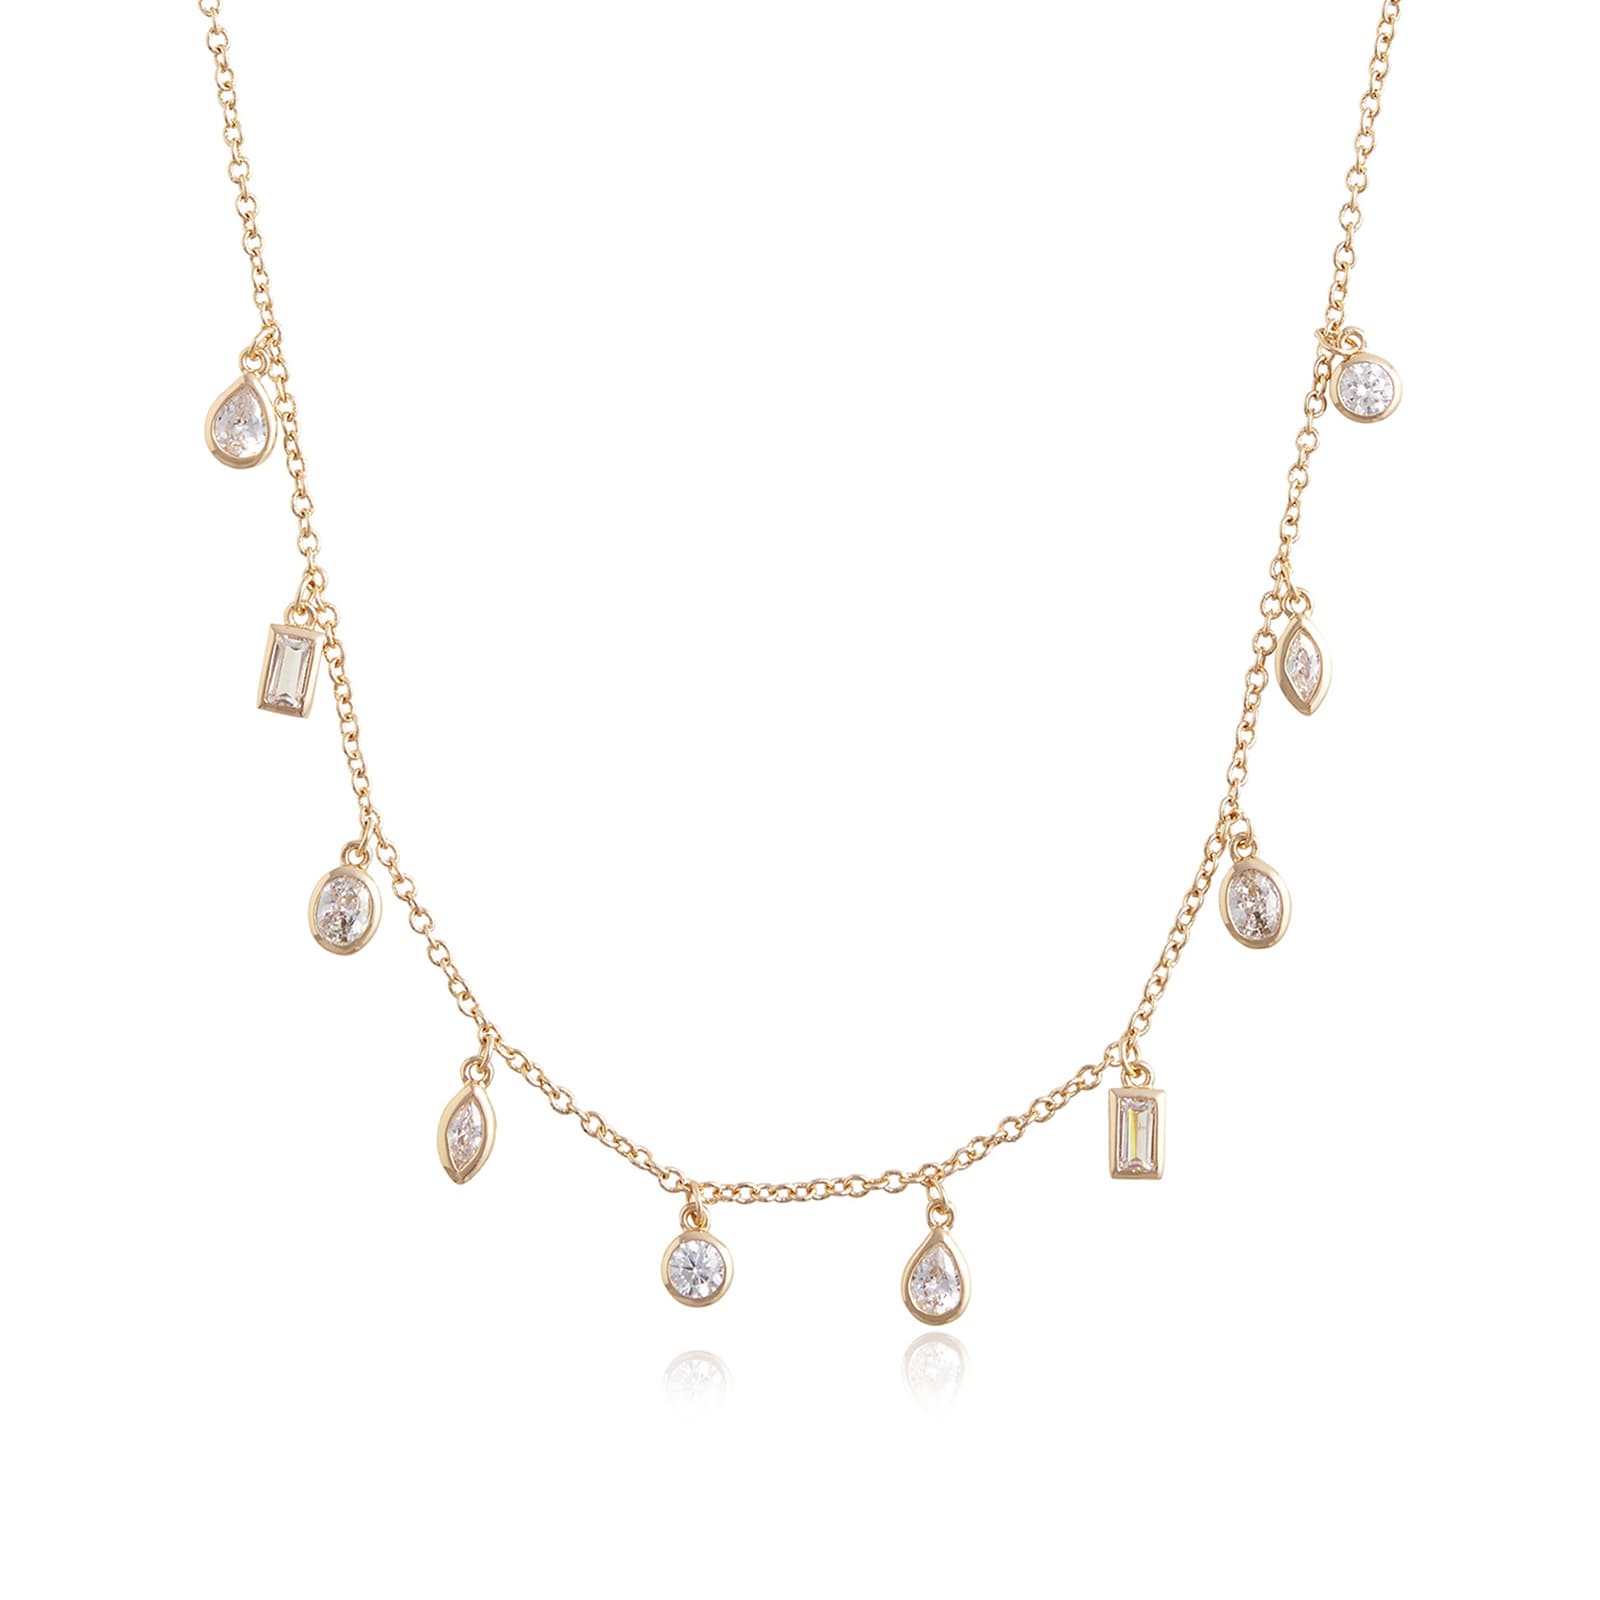 Yellow Gold Coloured Classics Gold Crystal Charm Necklace